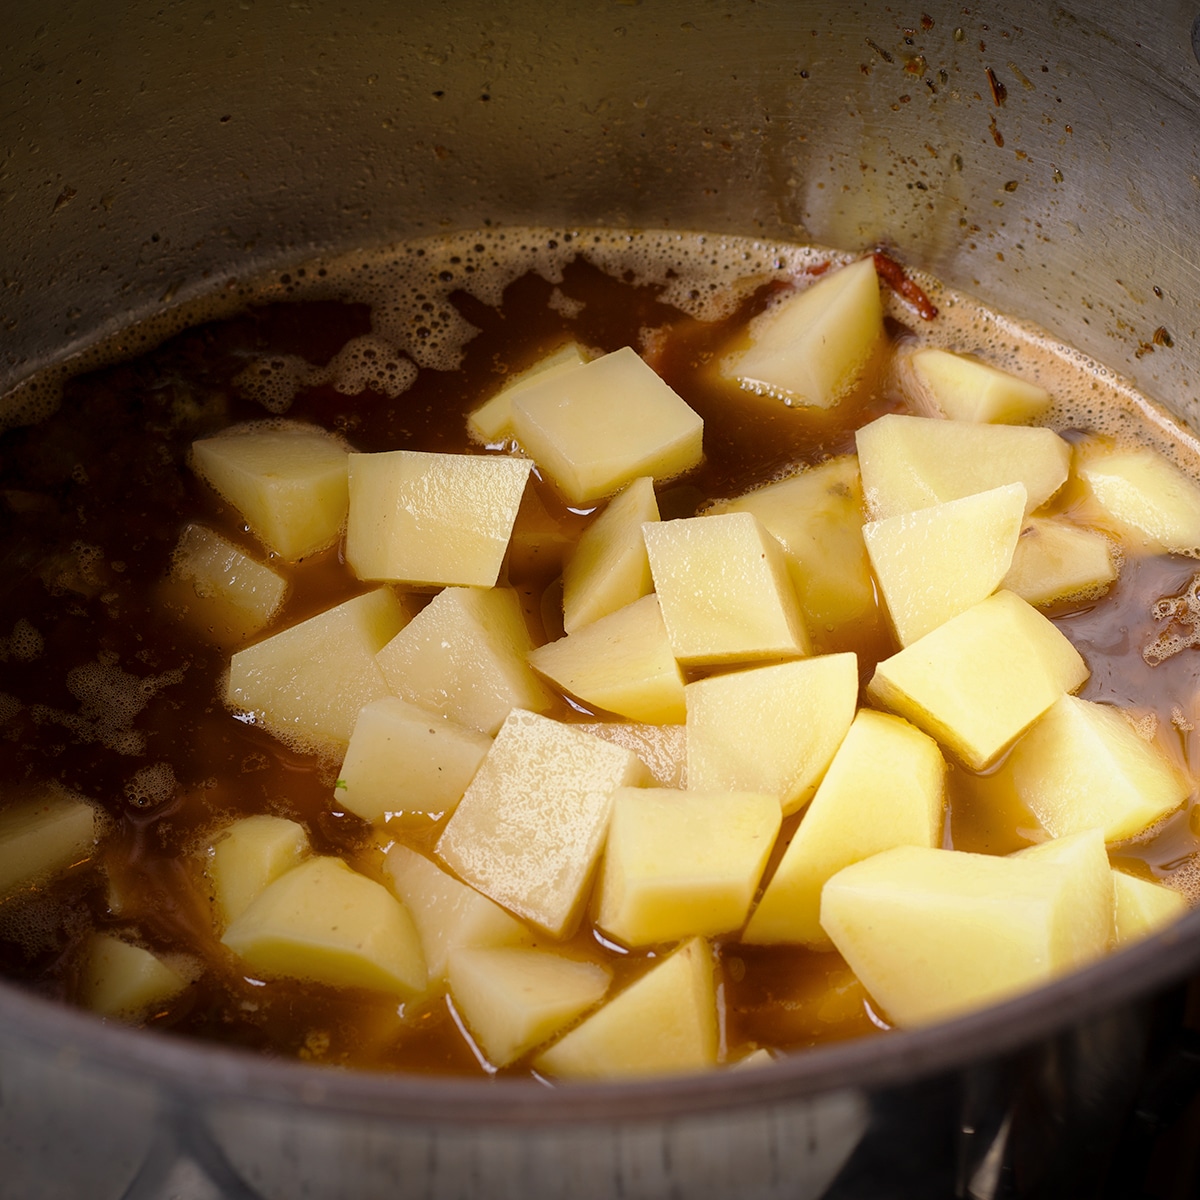 Adding chopped yellow potatoes to the broth with the sausage and bacon.